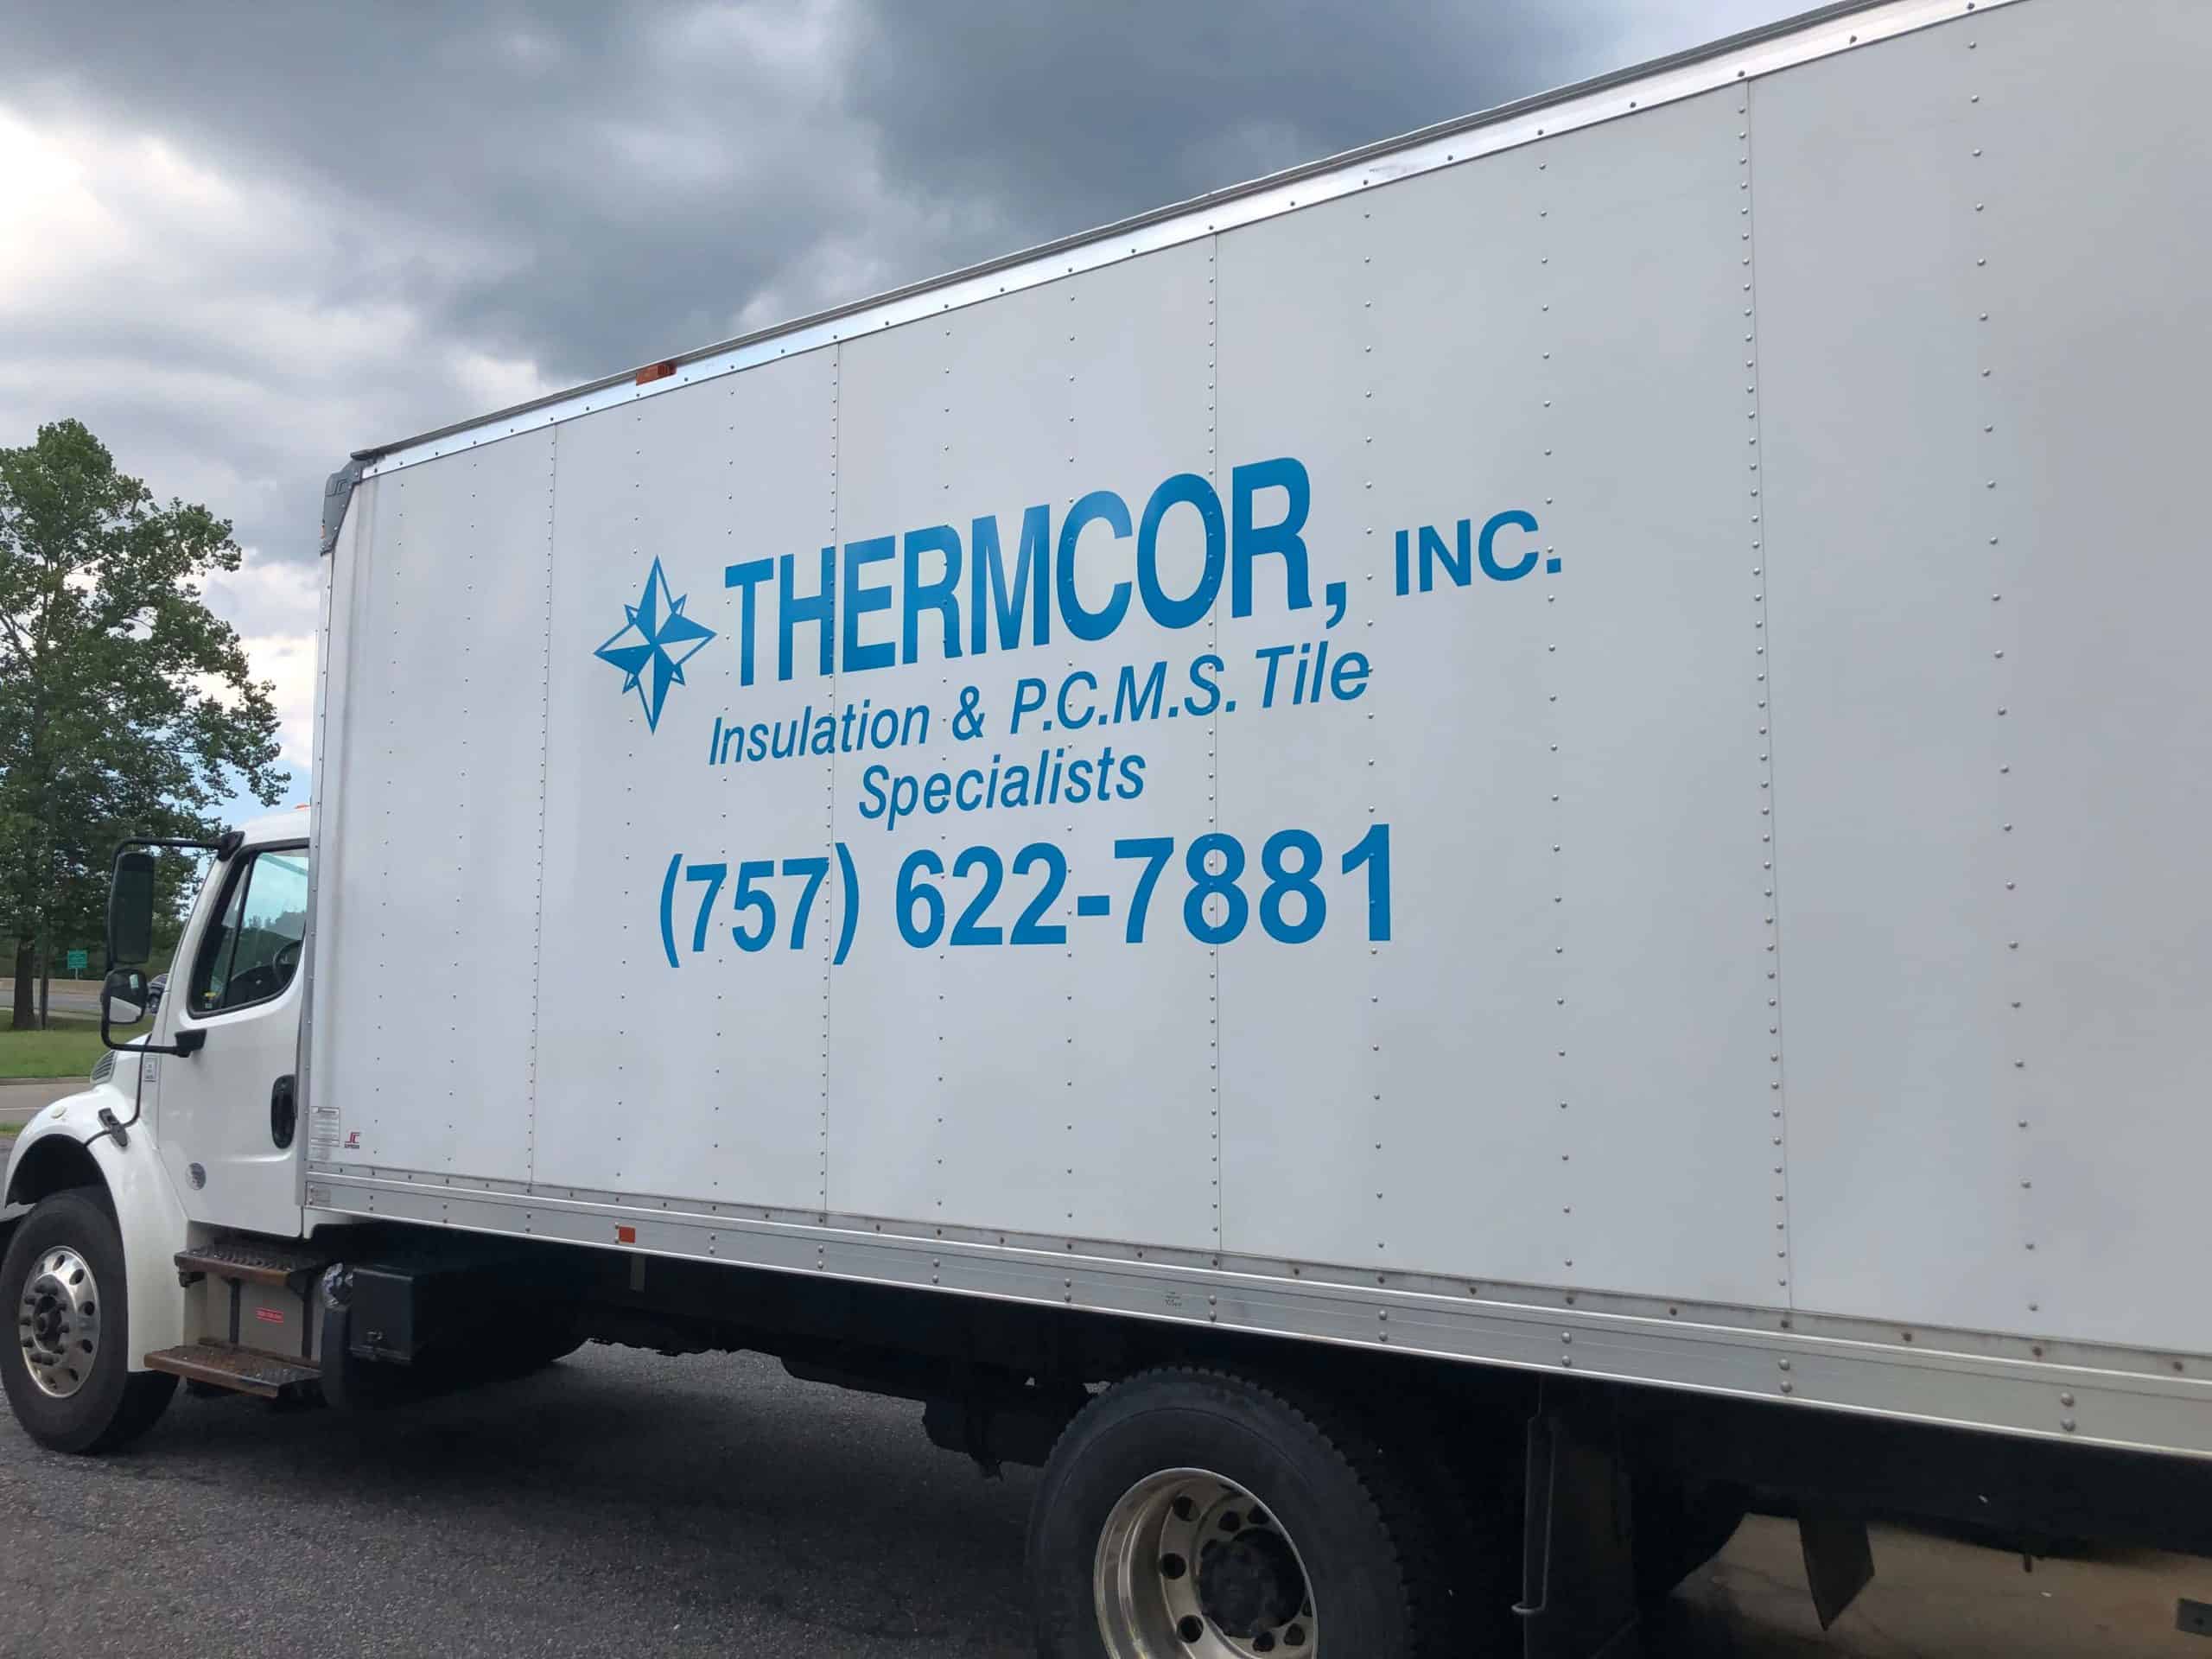 Box truck graphics and lettering for Thermcor Inc.